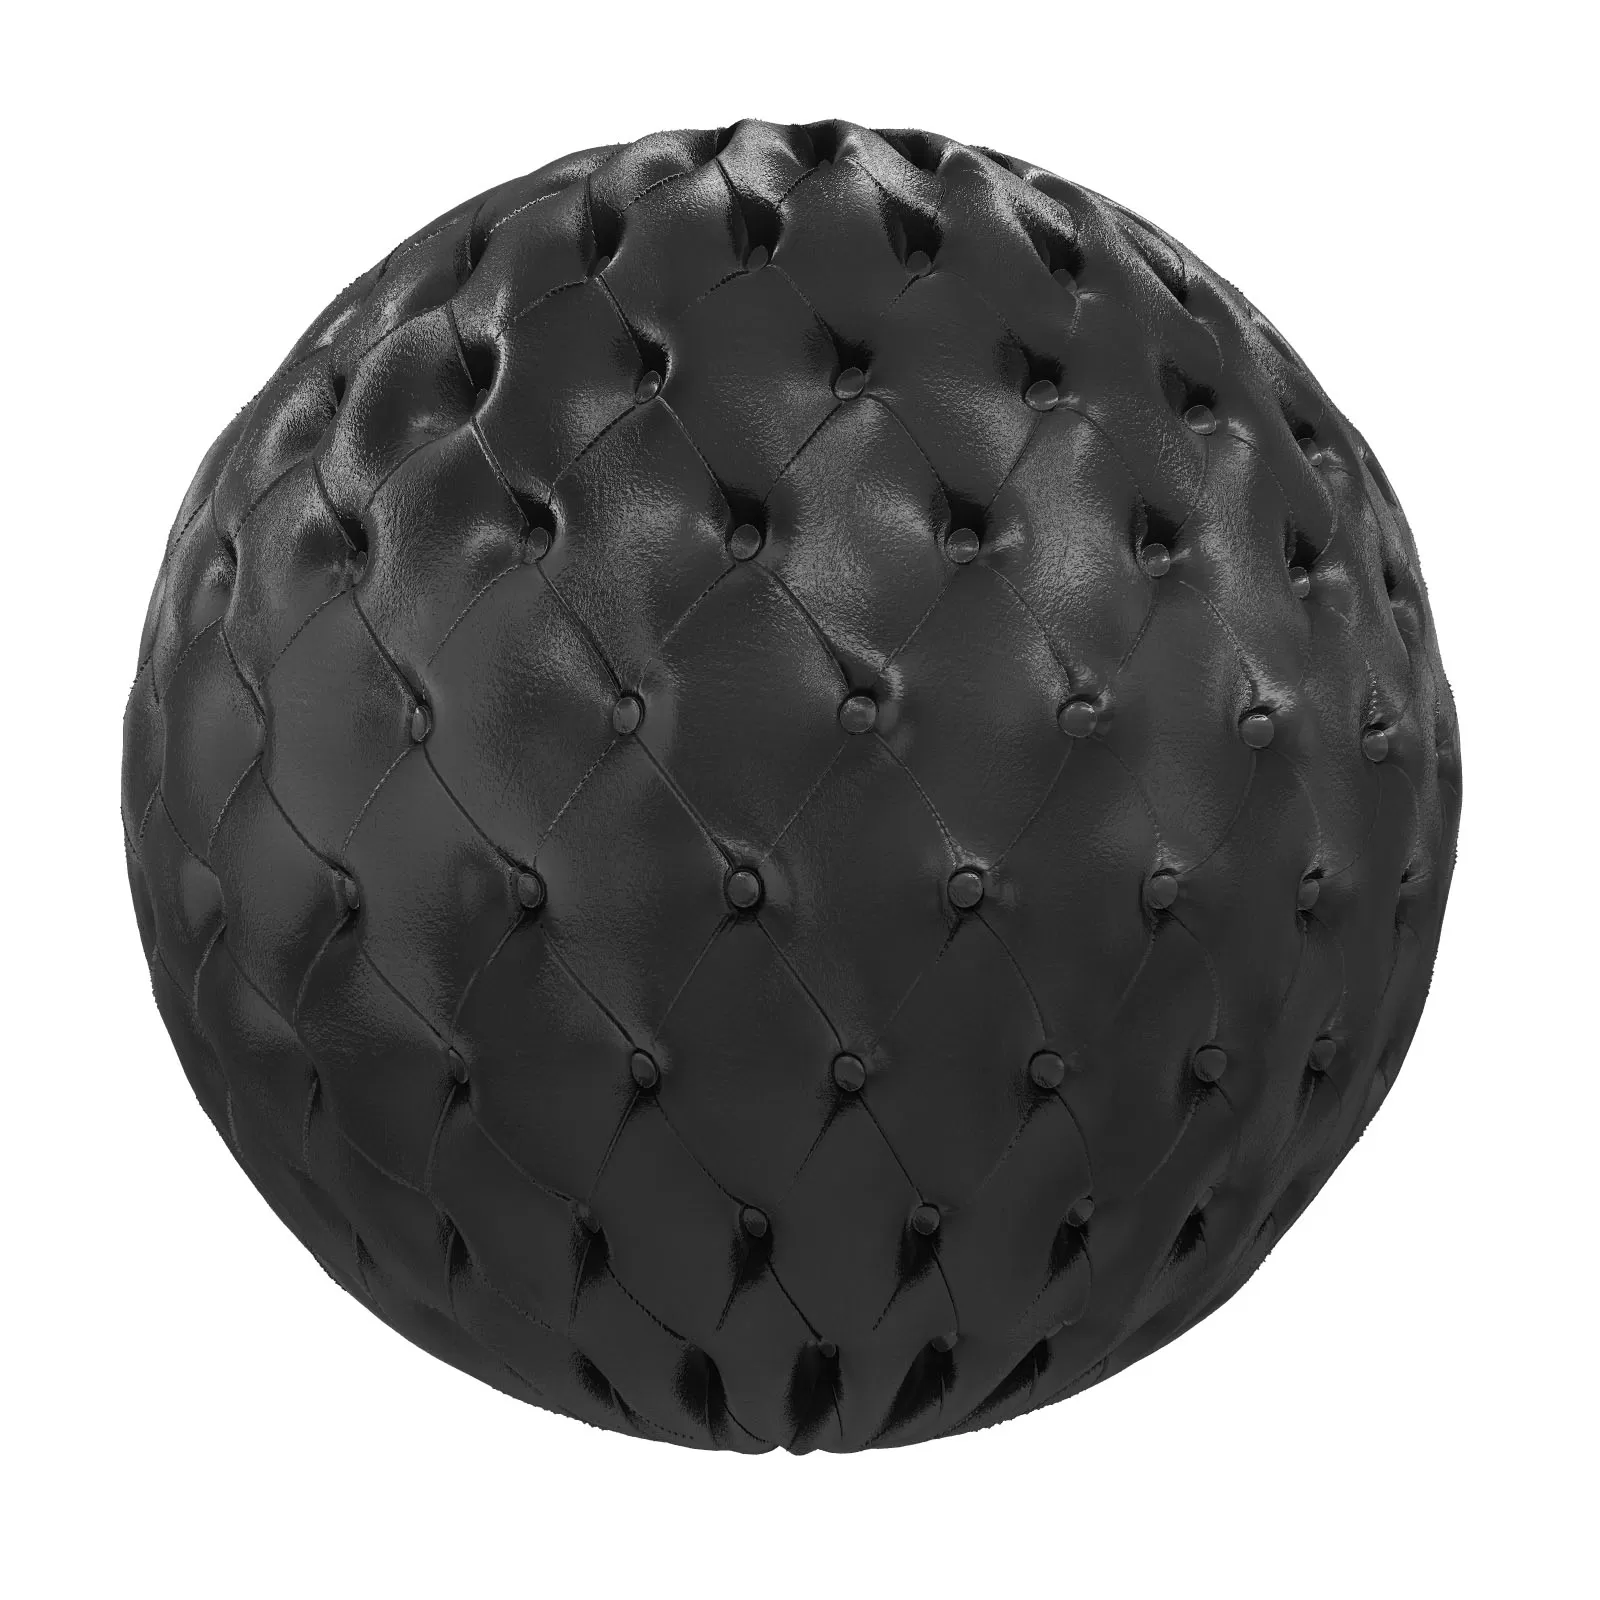 PBR CGAXIS TEXTURES – LEATHER – Quilted Black Leather